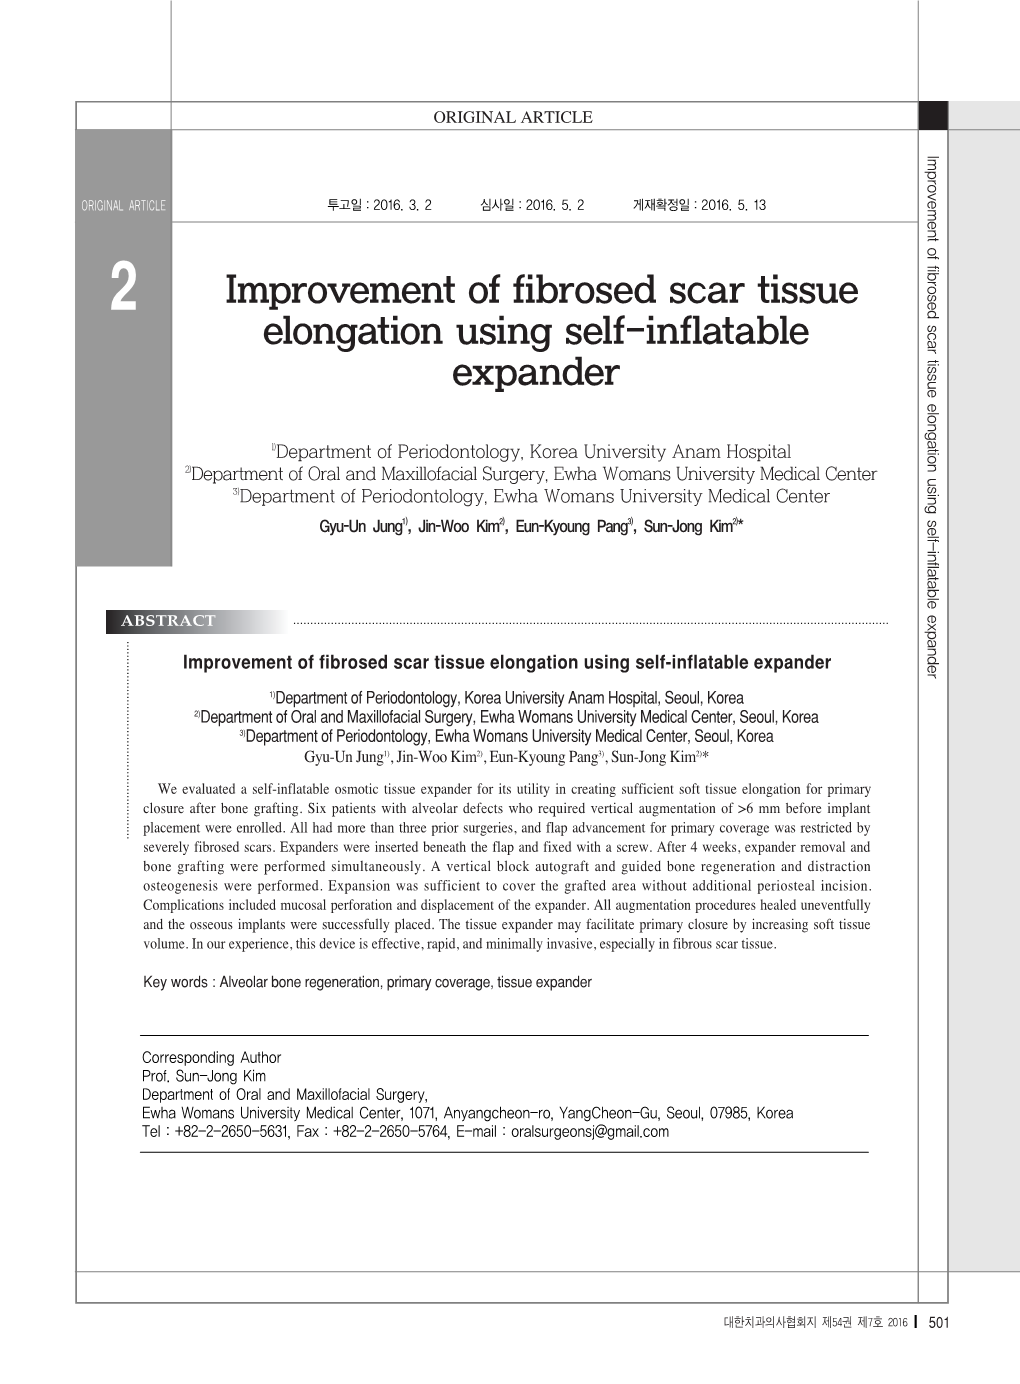 Improvement of Fibrosed Scar Tissue Elongation Using Self-Inflatable Expander